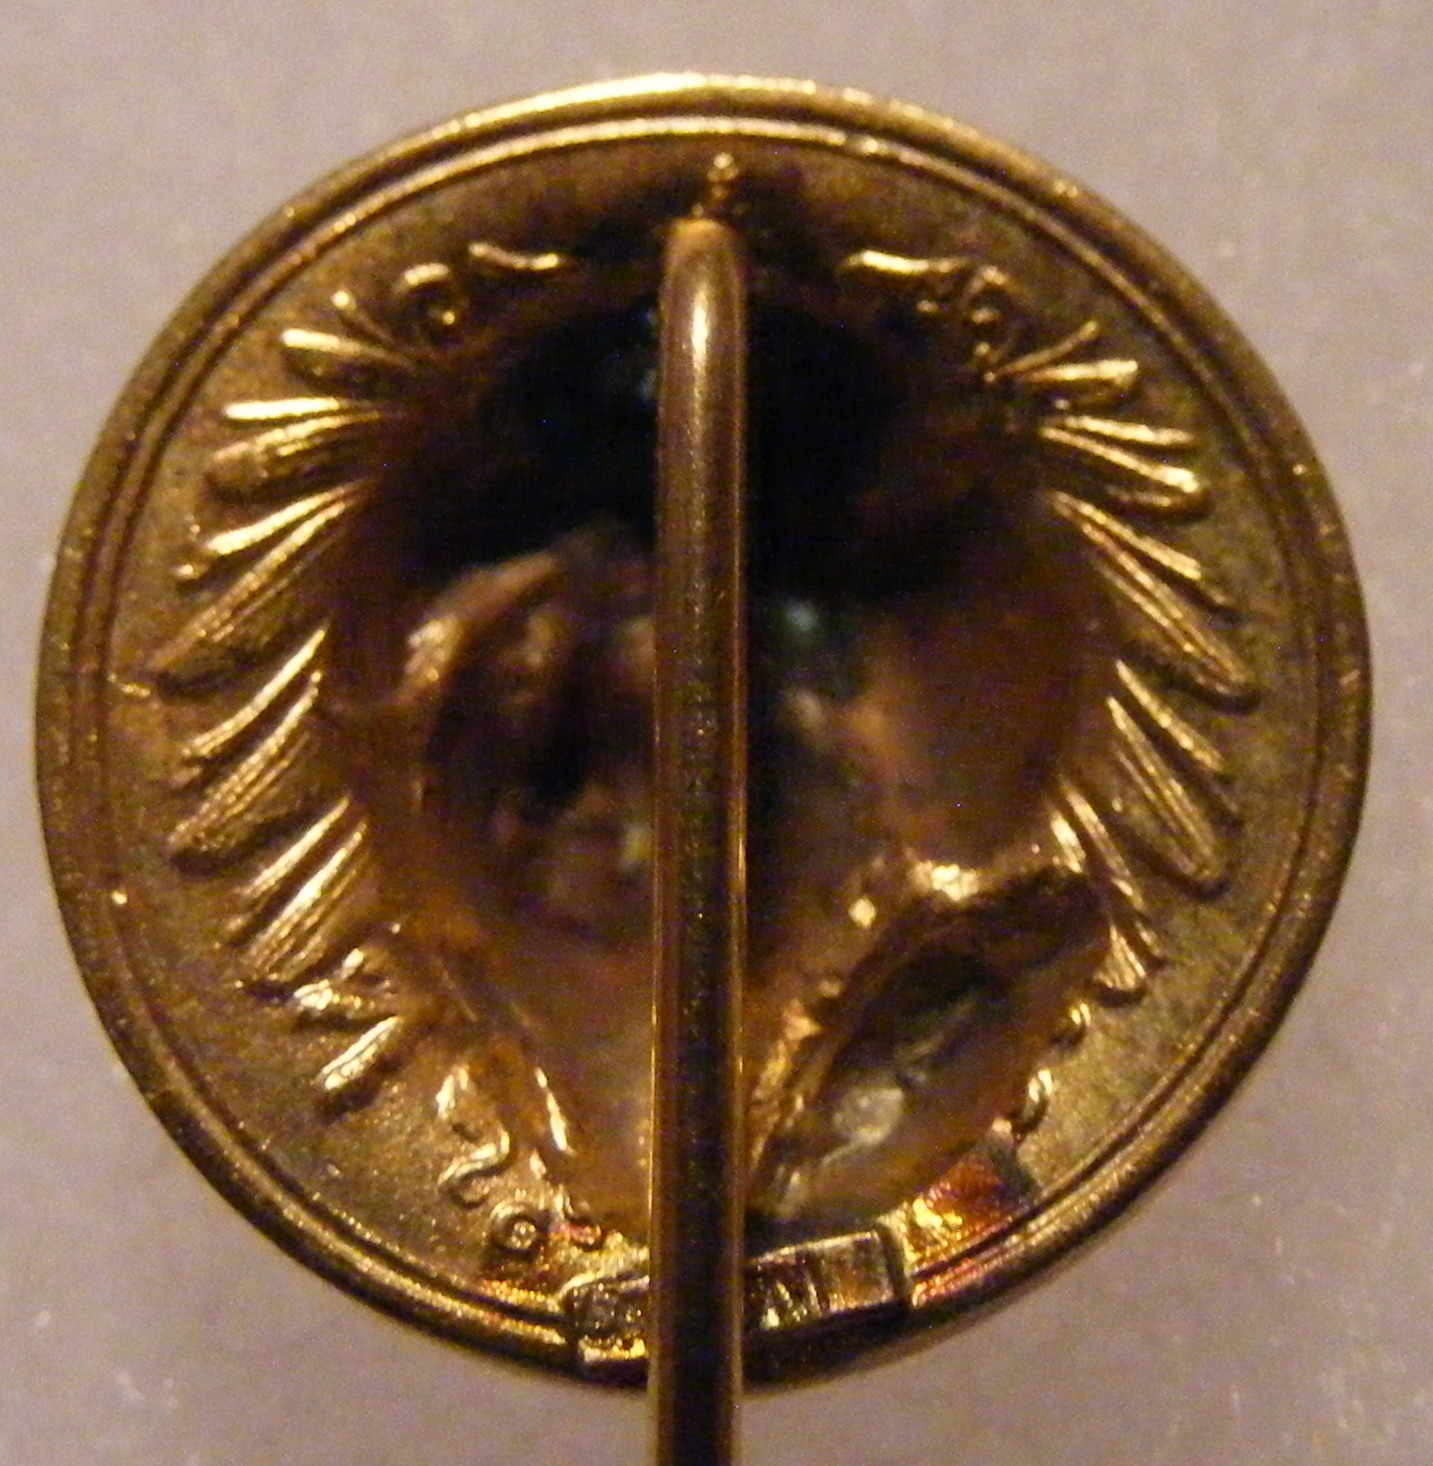 German Pfenning - Dime sized liberty 1913 Gold plated, on stick pin, DRGM R.jpg